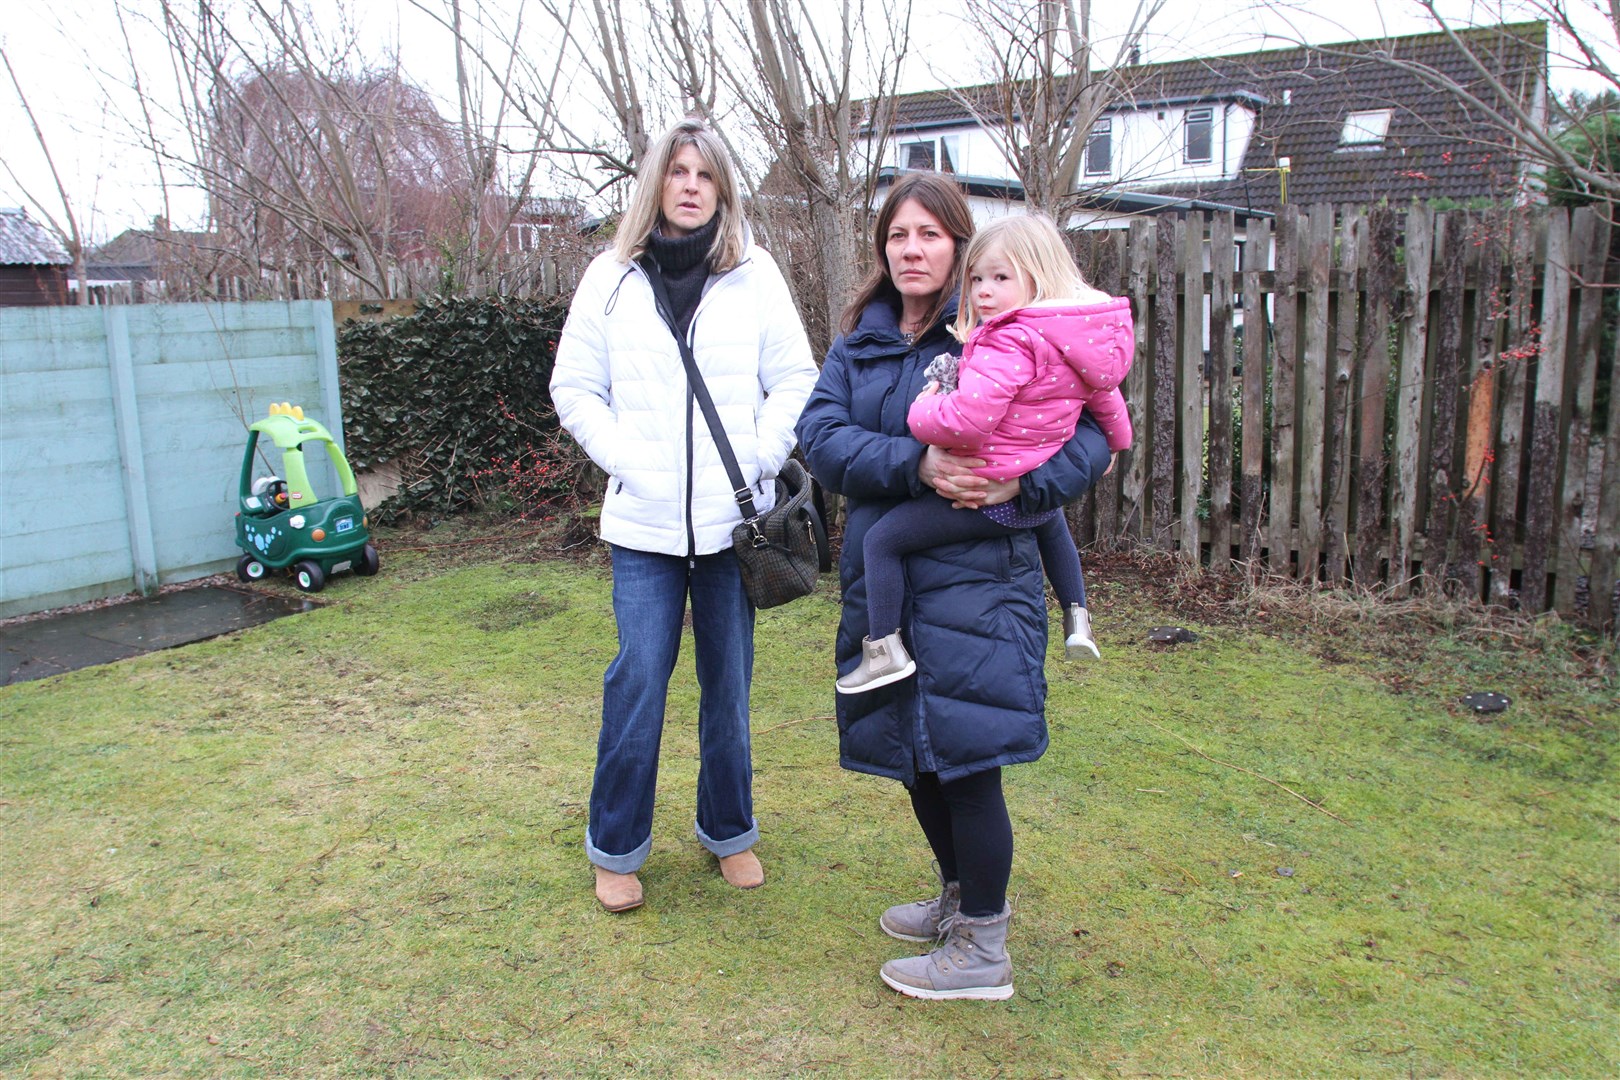 Objectors Fiona Coates (left) with Susie Petty and daughter Annie (3).